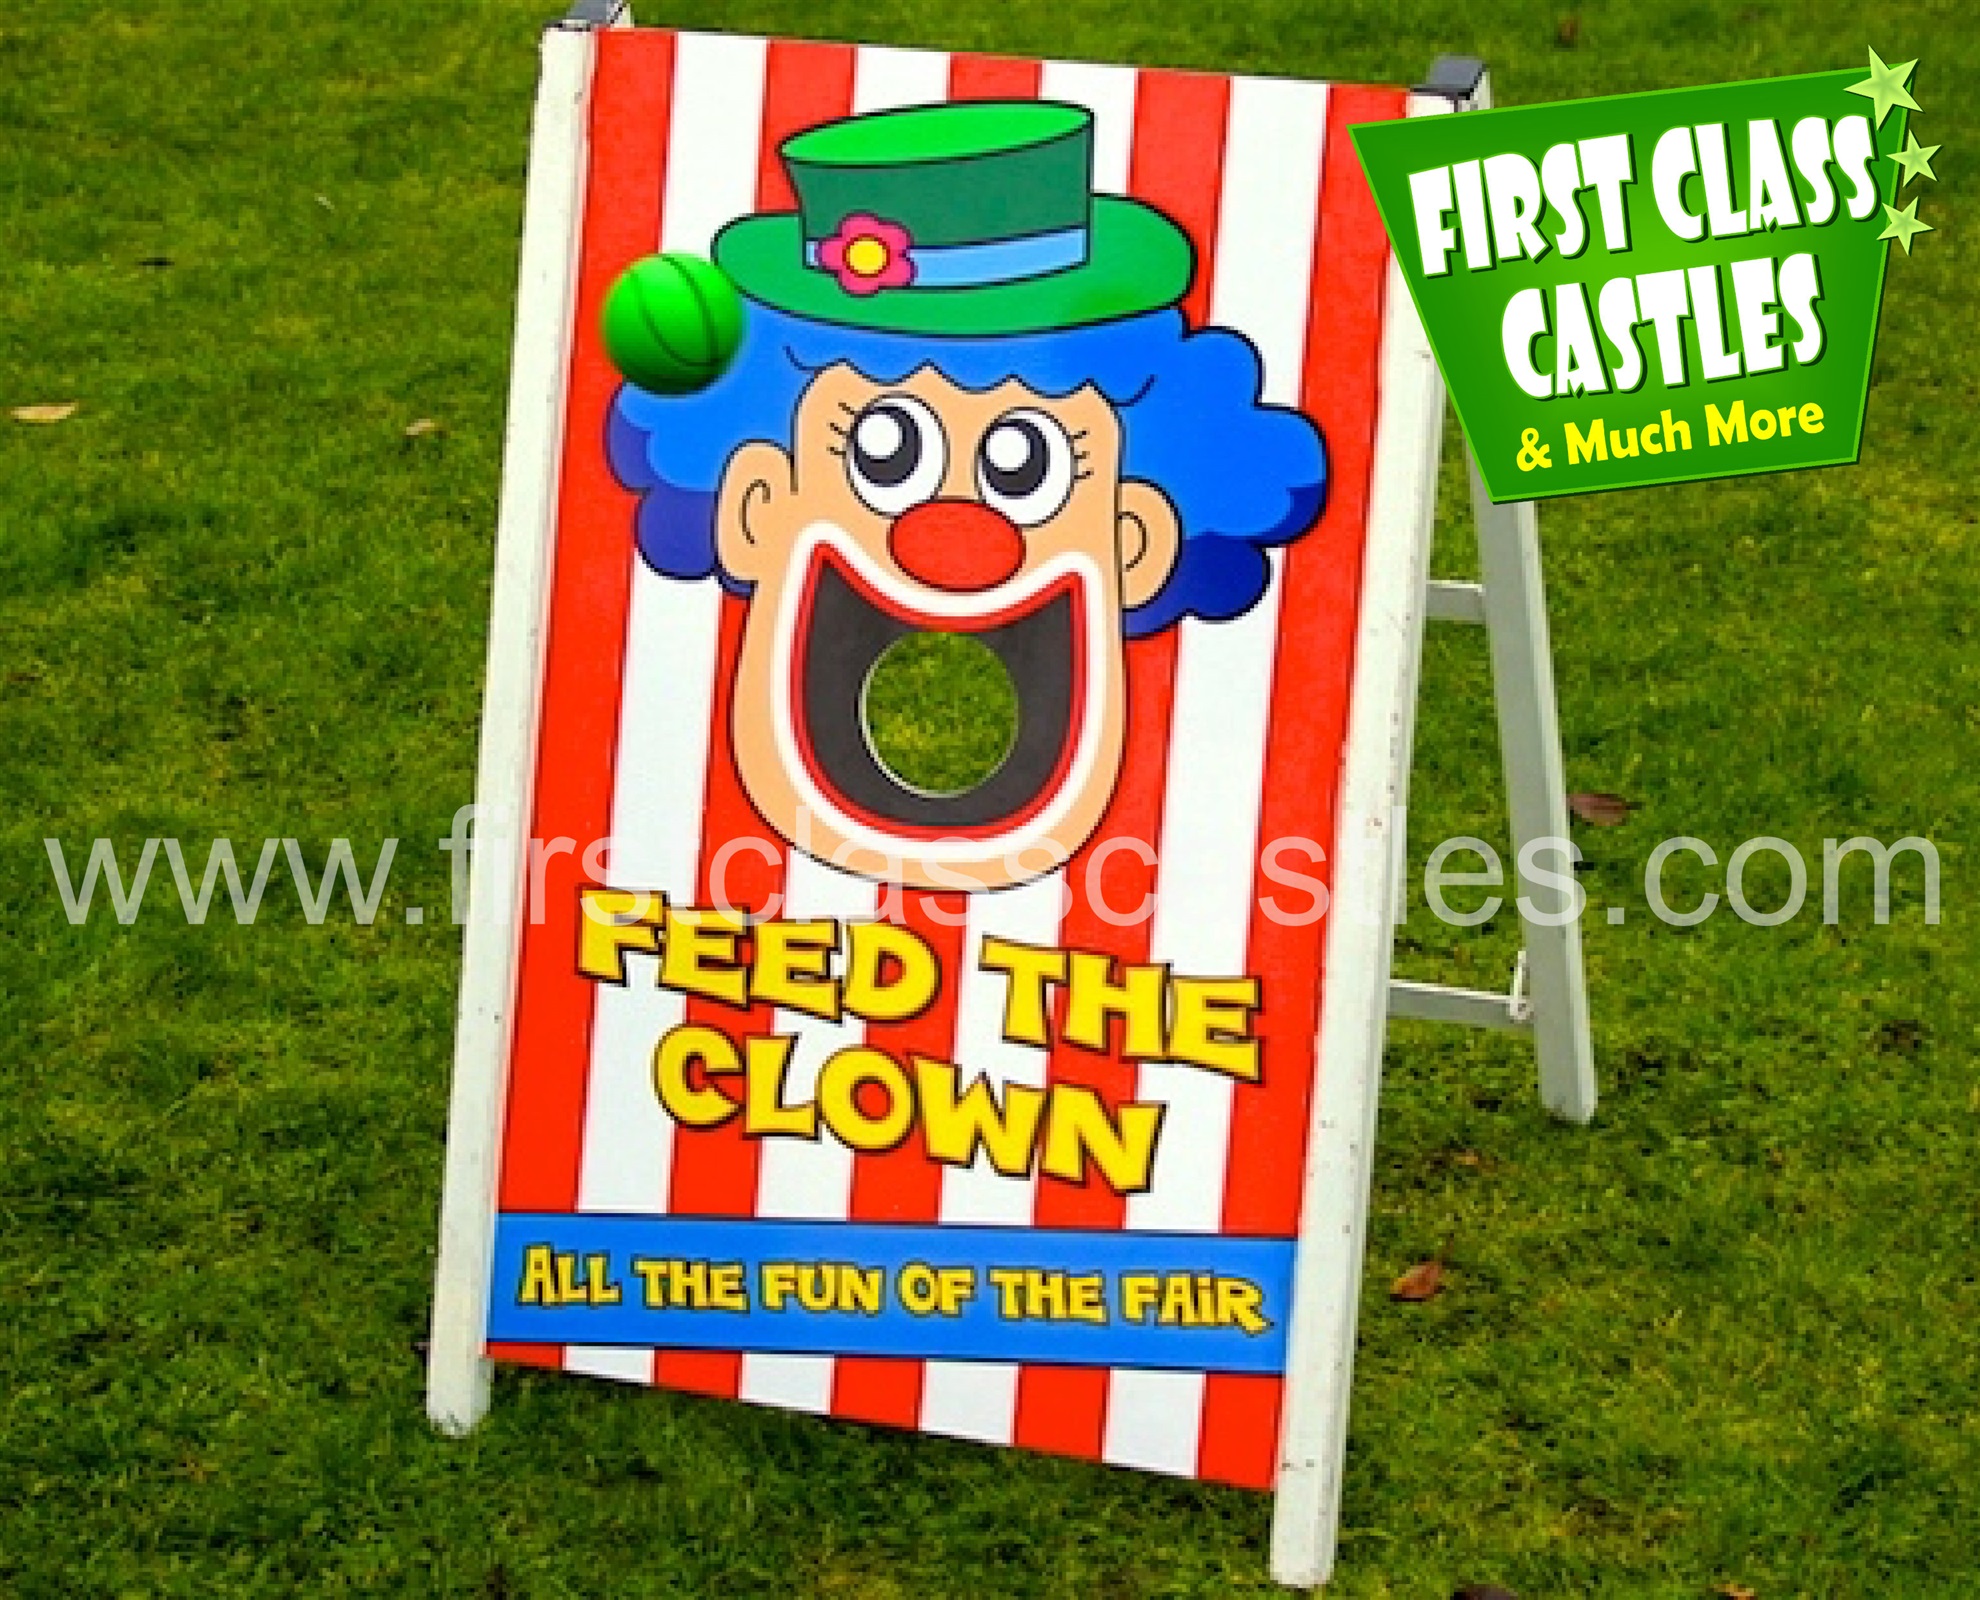 First Class Castles - Feed the Clown Party / Event Game for Hire in ...